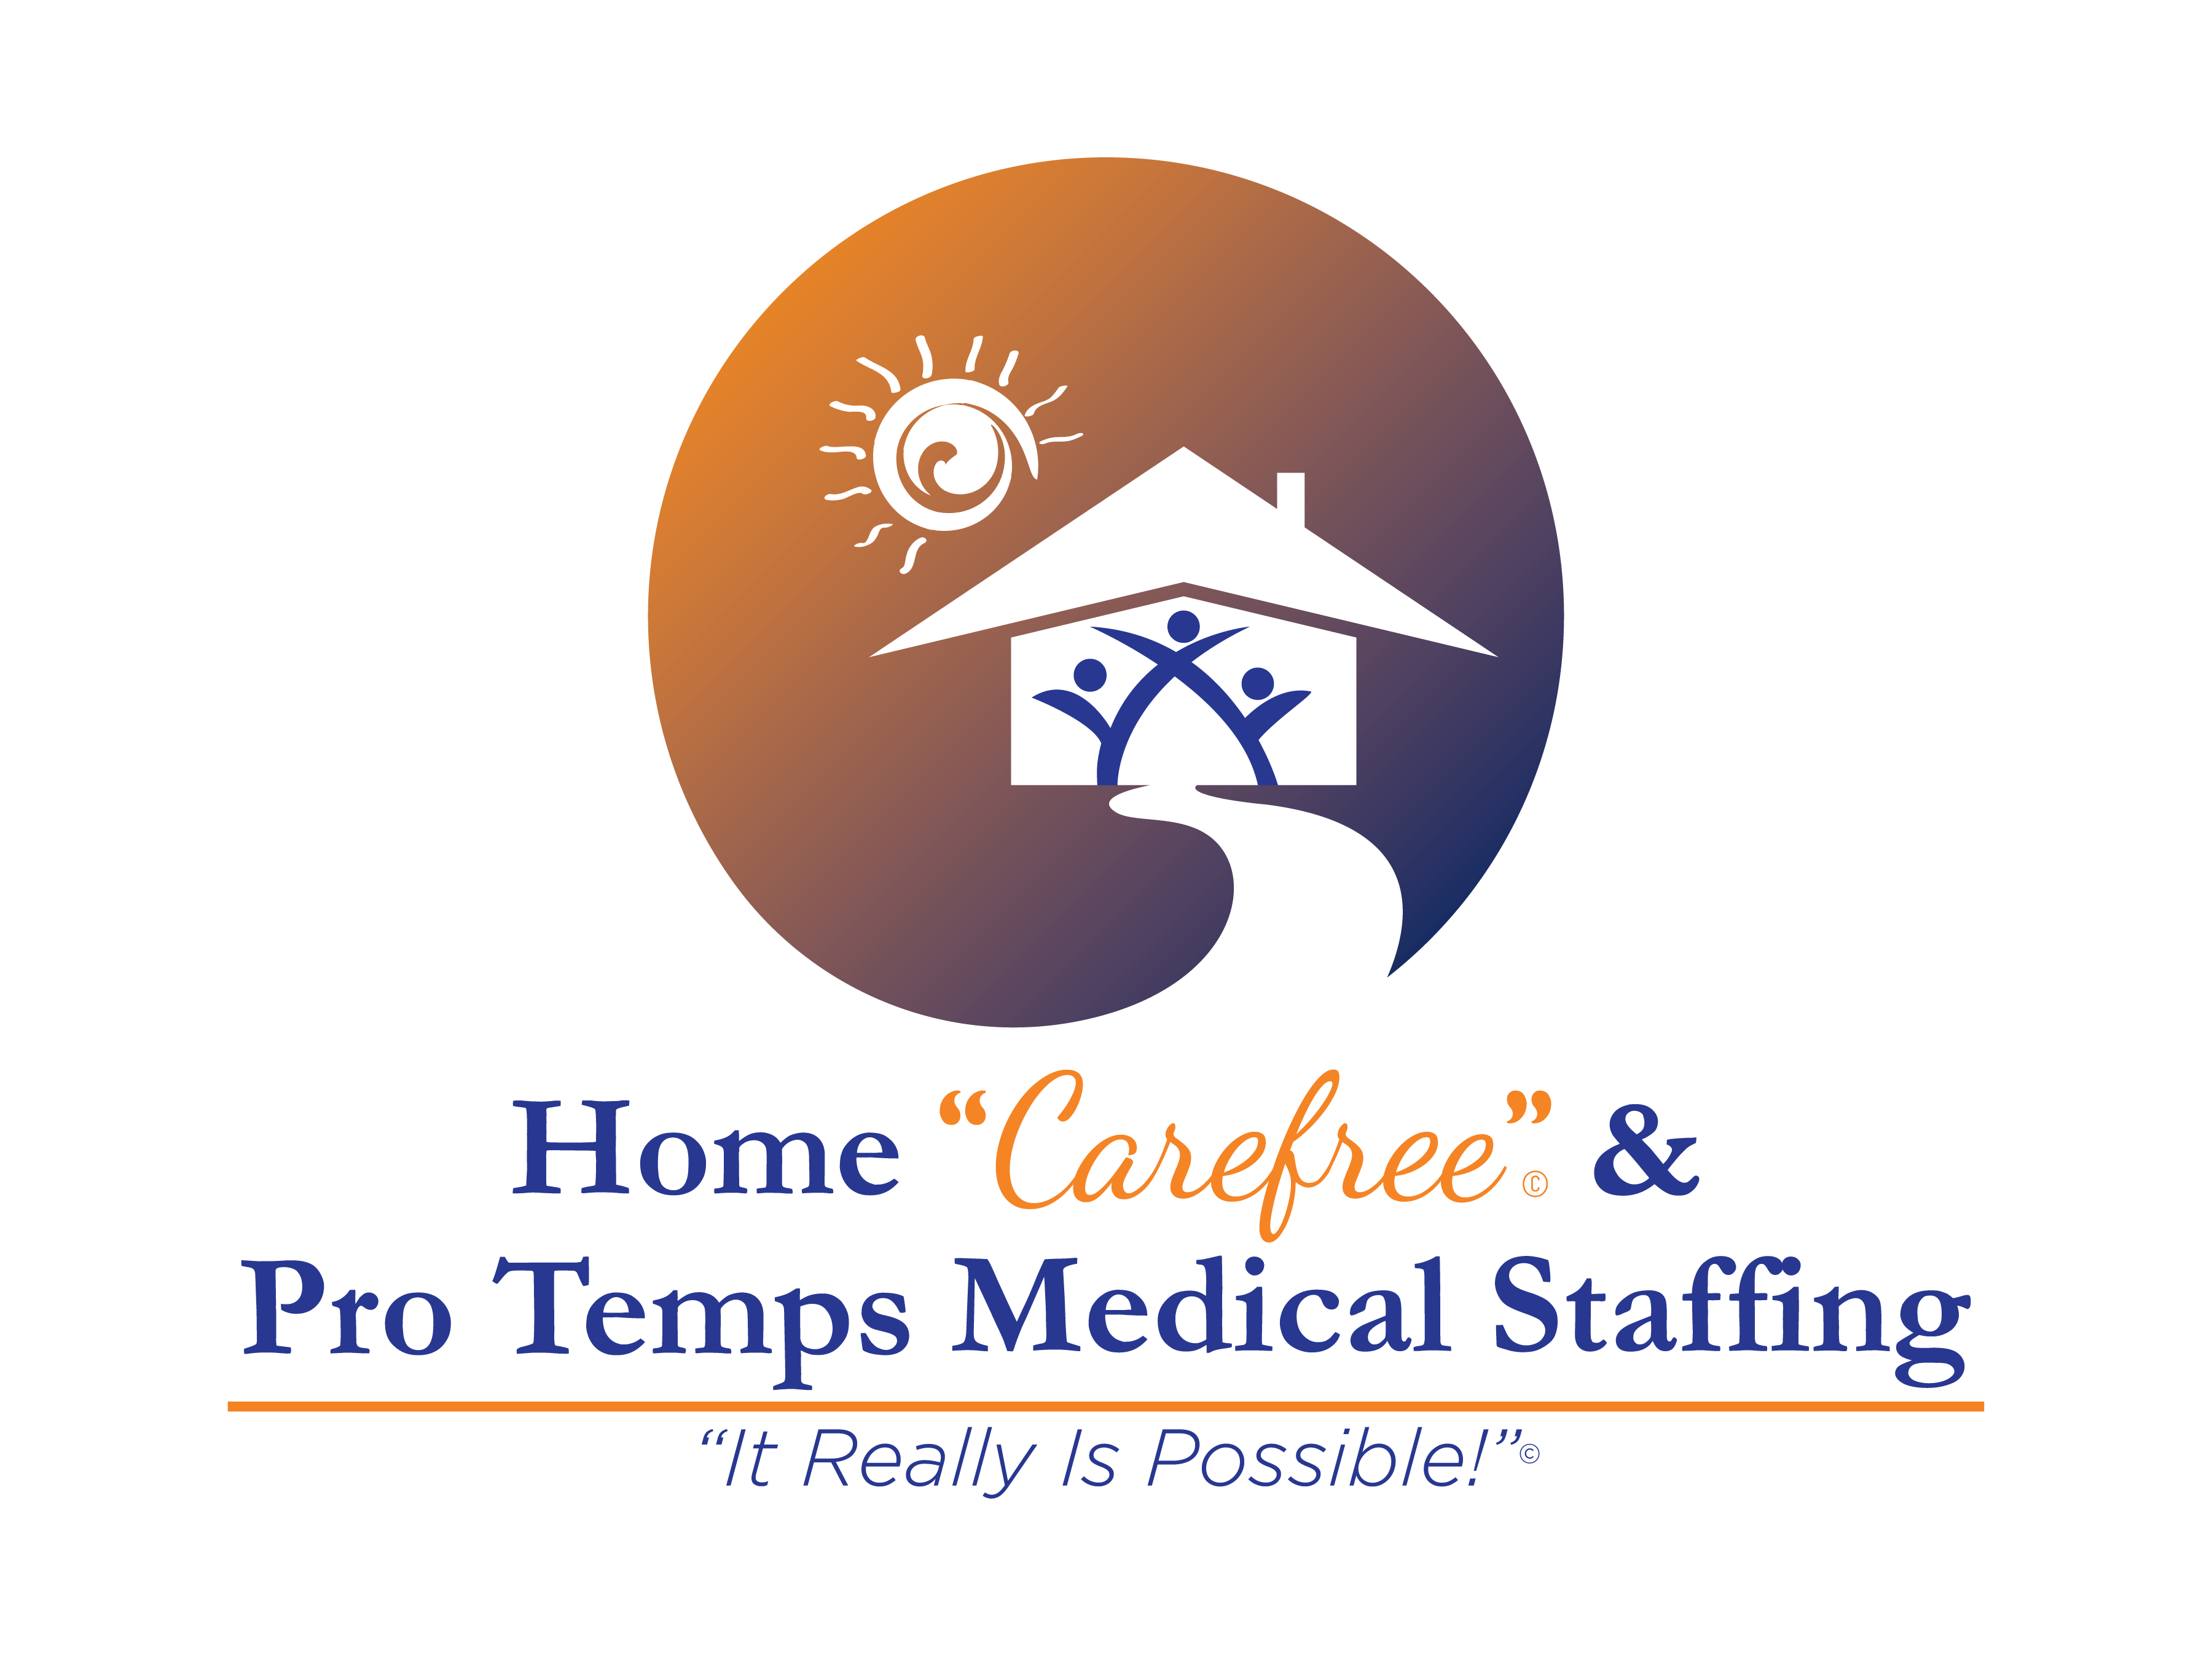 Home 'Carefree' and Pro Temps Medical Staffing